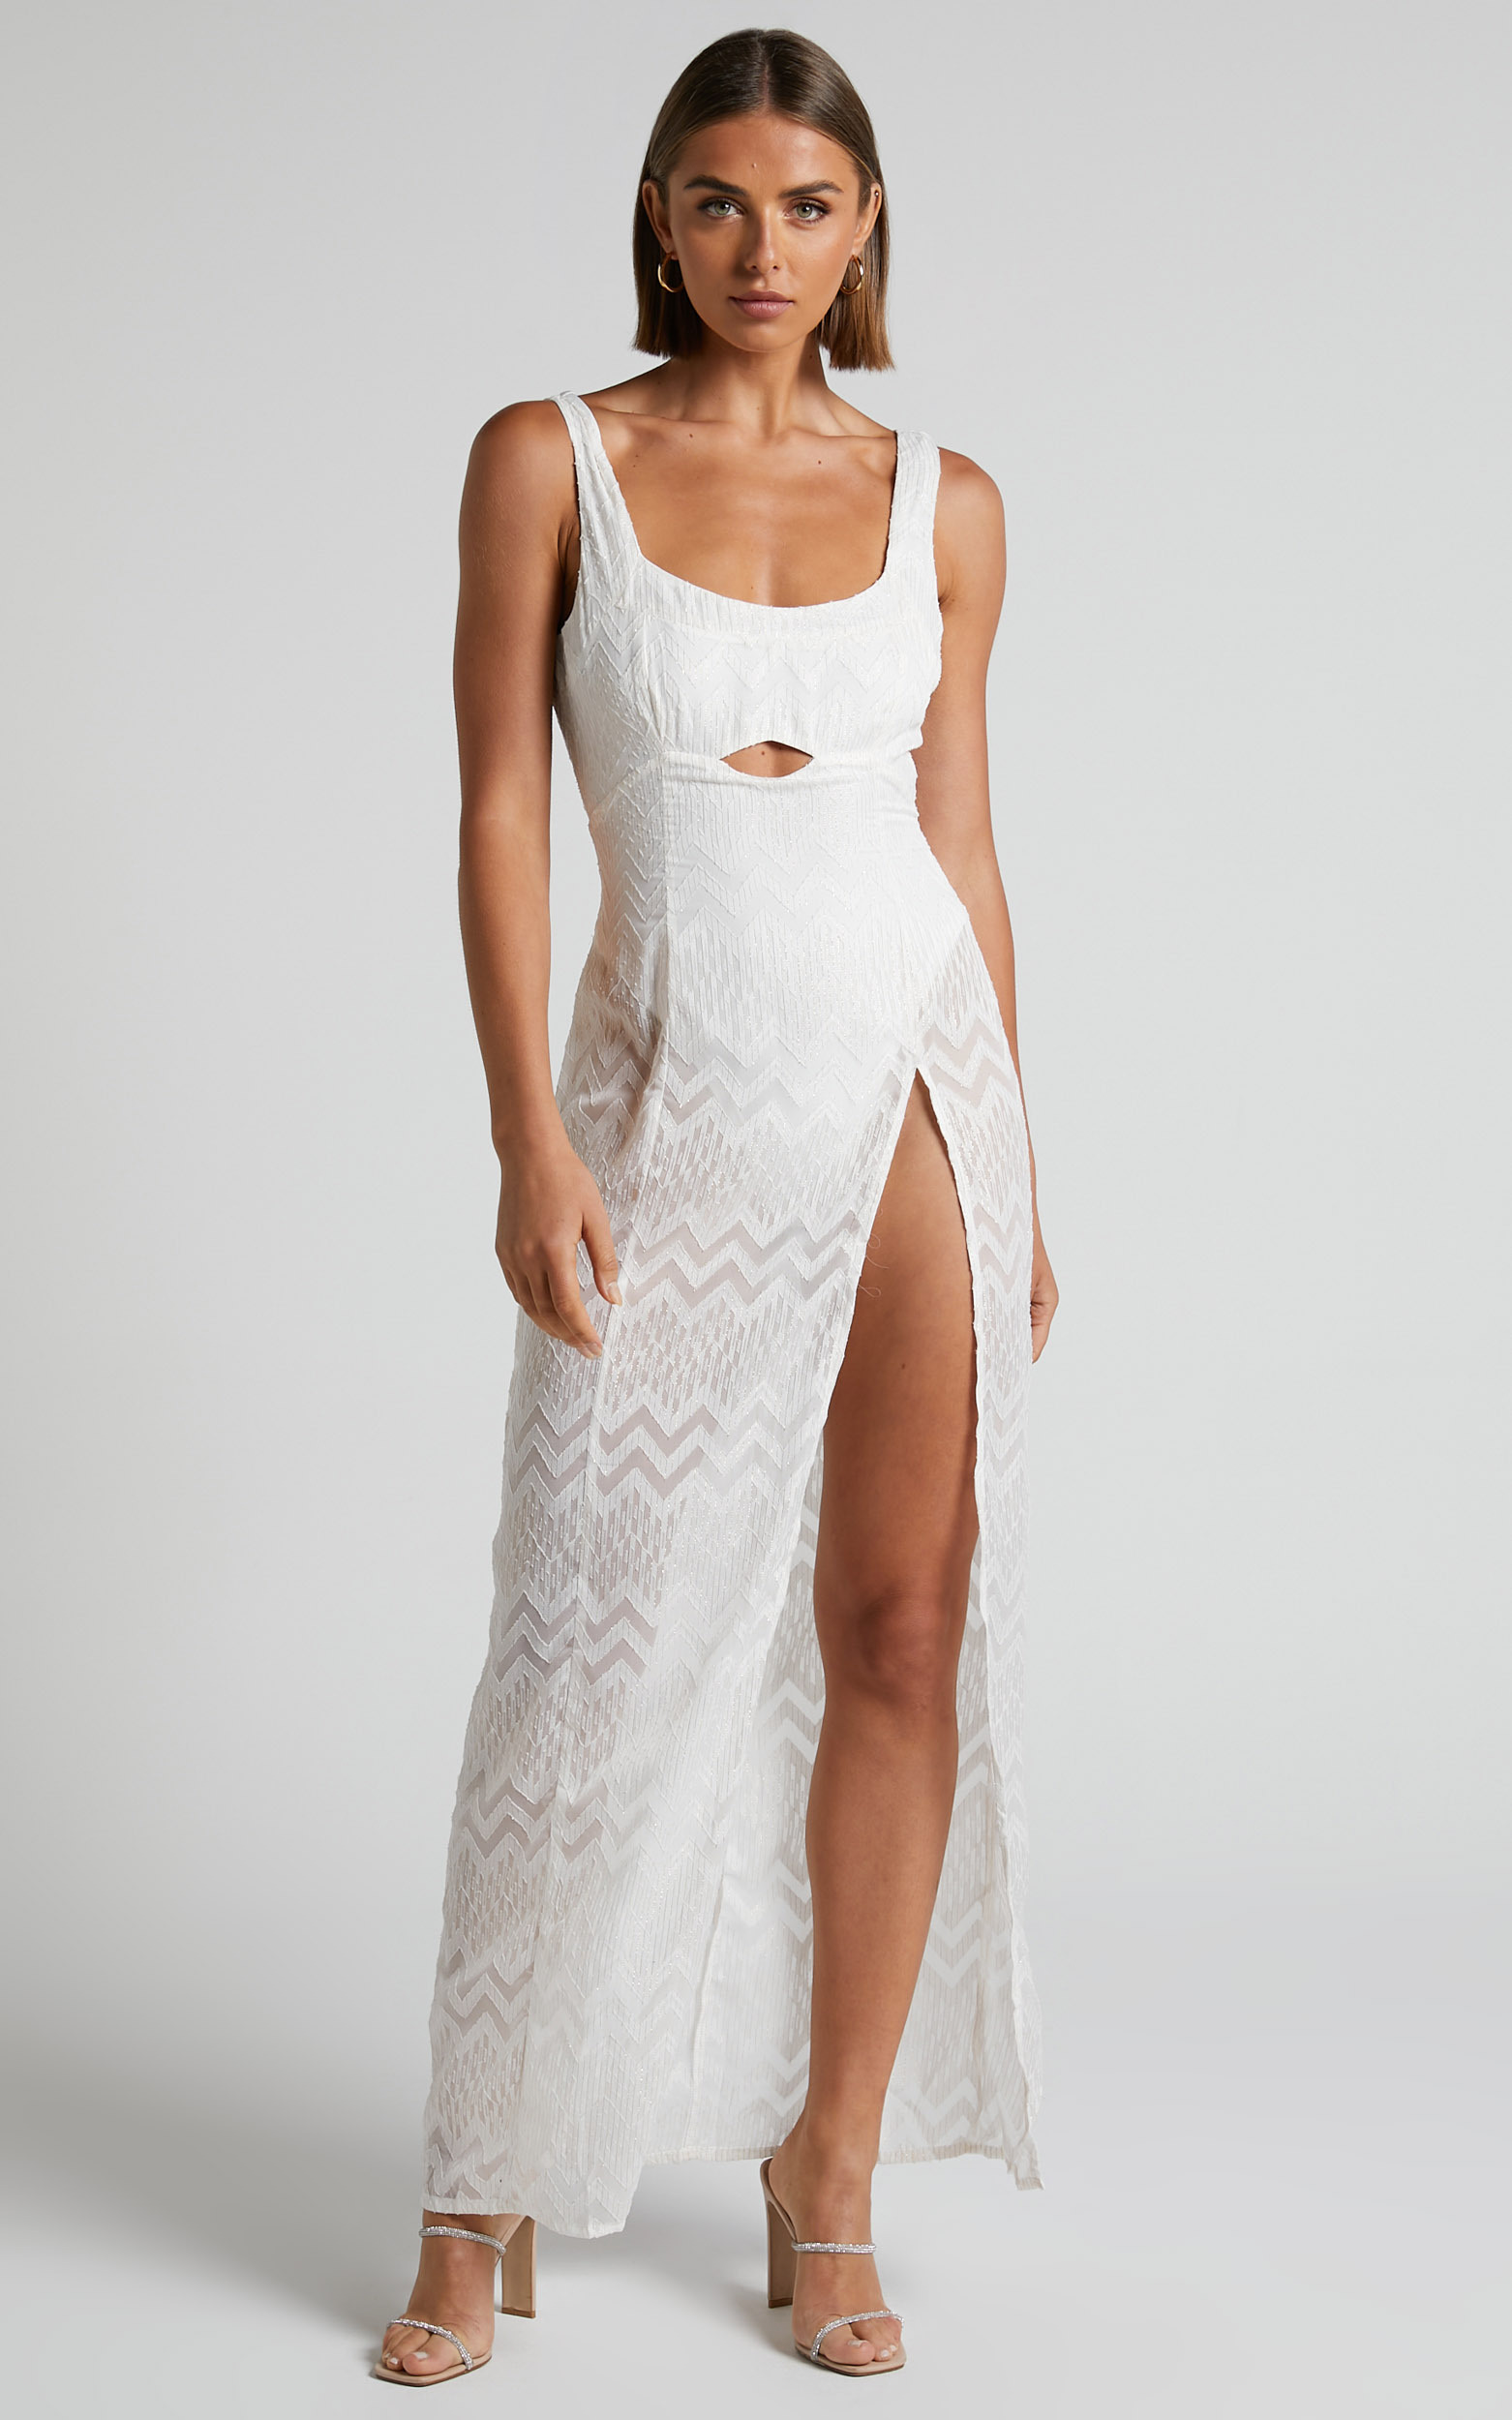 Khryzsha Sheer Cut Out Maxi Dress in White - 04, WHT2, hi-res image number null